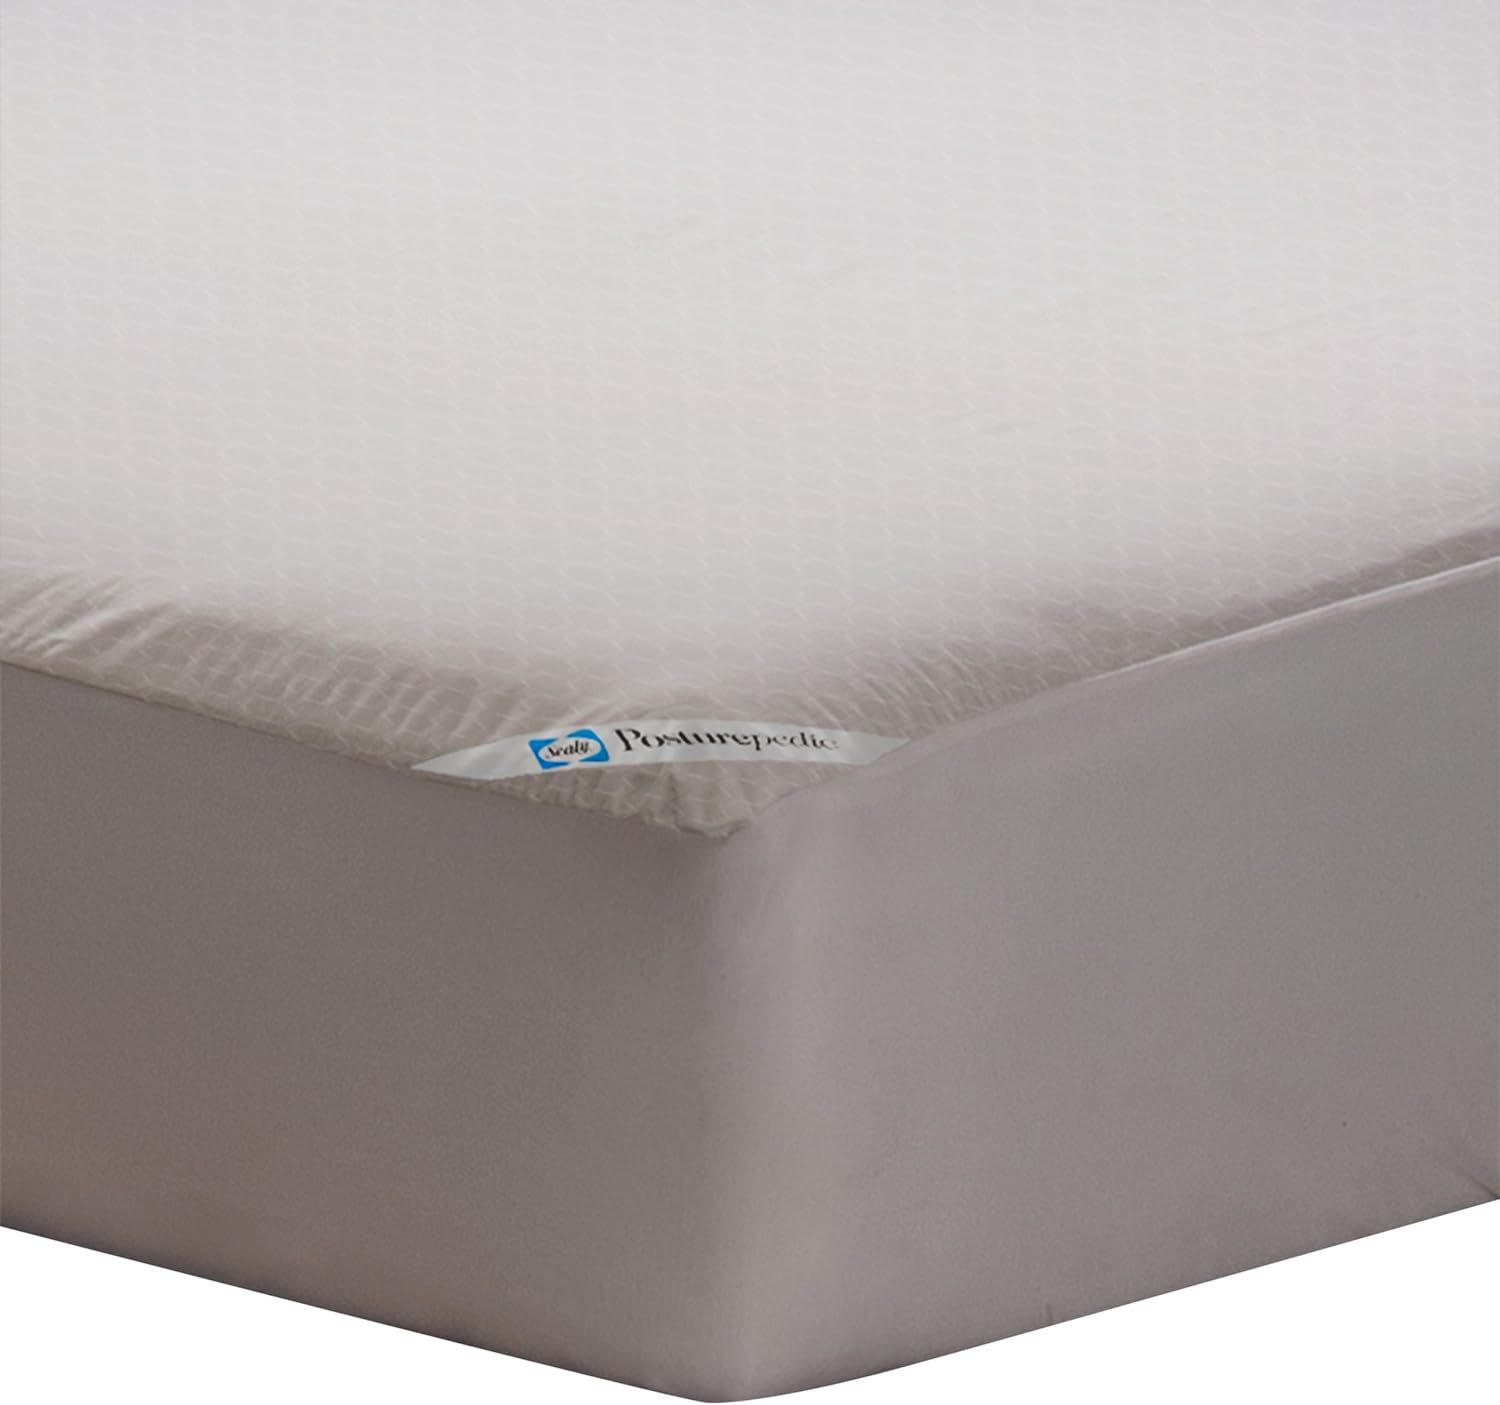 Mattress Protector With Zipper, Sealy Posturepedic Allergy Protection. - $41.92